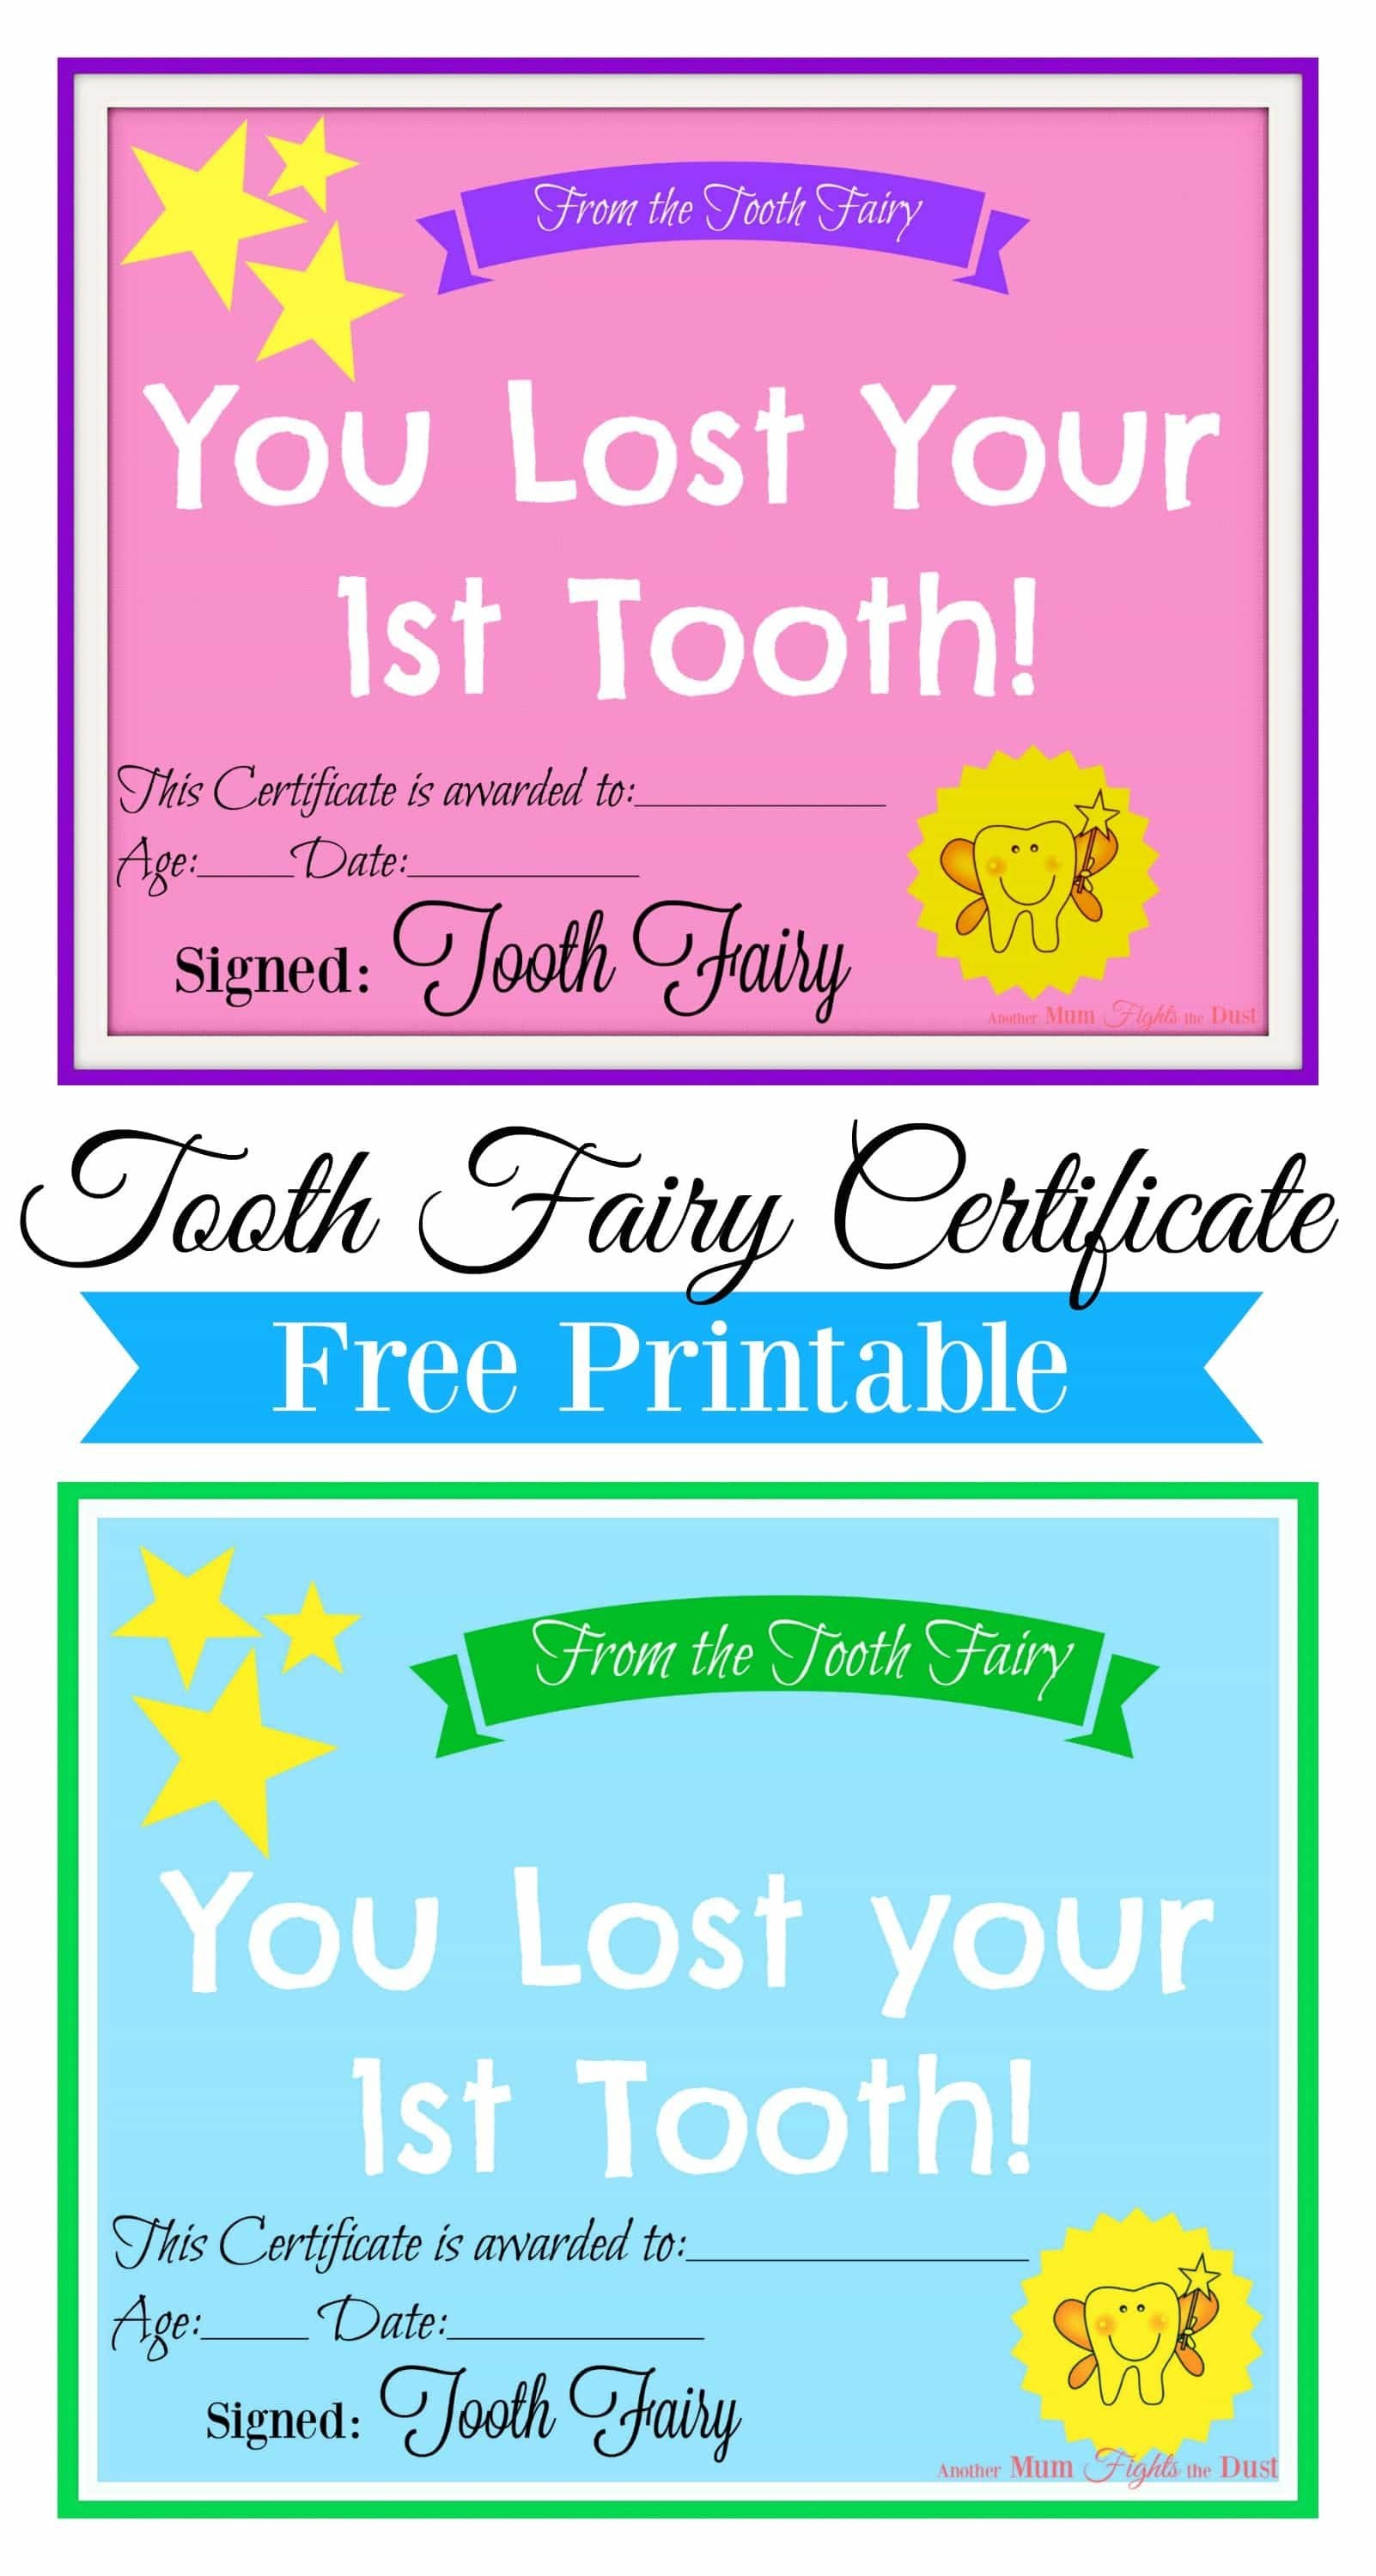 Free Printable Tooth Fairy Certificate | Tooth Fairy Ideas | Tooth - Free Printable Tooth Fairy Certificate